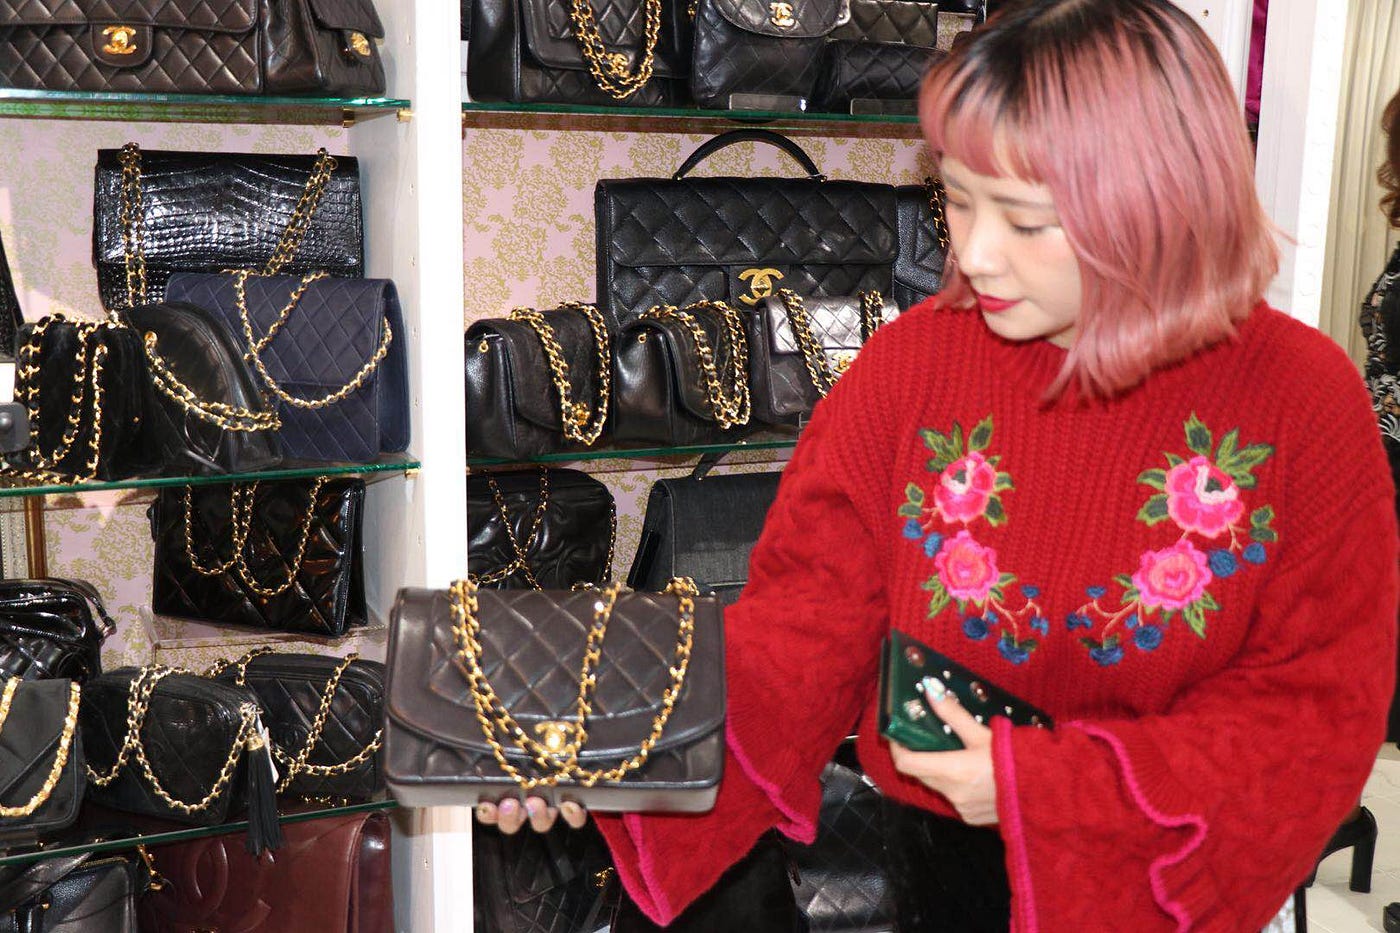 Where to Find the Best Vintage + Thrift Clothing Shops in Chicago